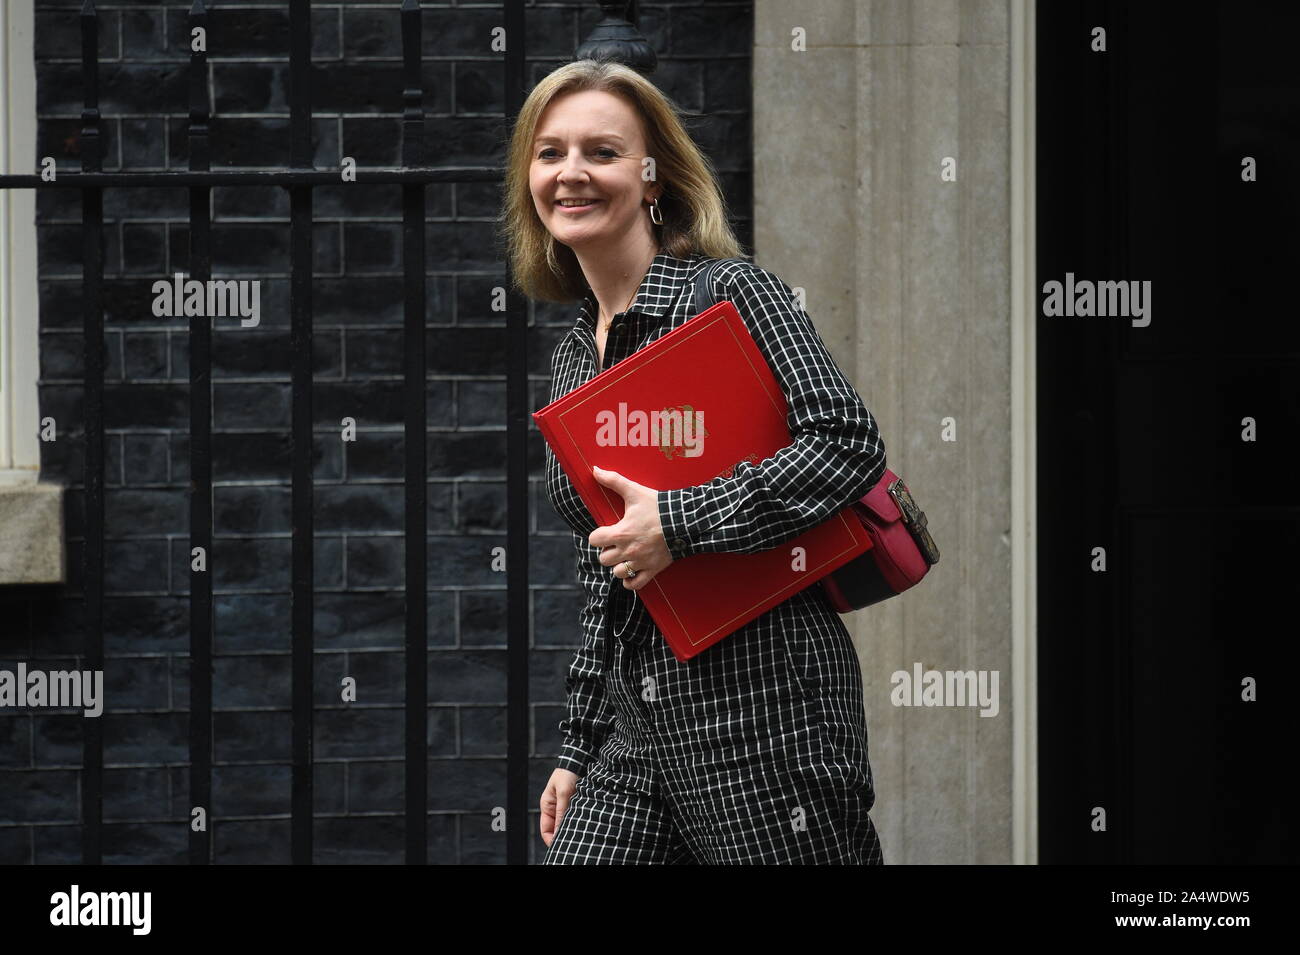 International Trade Secretary Liz Truss leaves 10 Downing Street, London, following a Cabinet meeting. PA Photo. Picture date: Wednesday October 16, 2019. See PA story POLITICS Brexit. Photo credit should read: Kirsty O'Connor/PA Wire Stock Photo